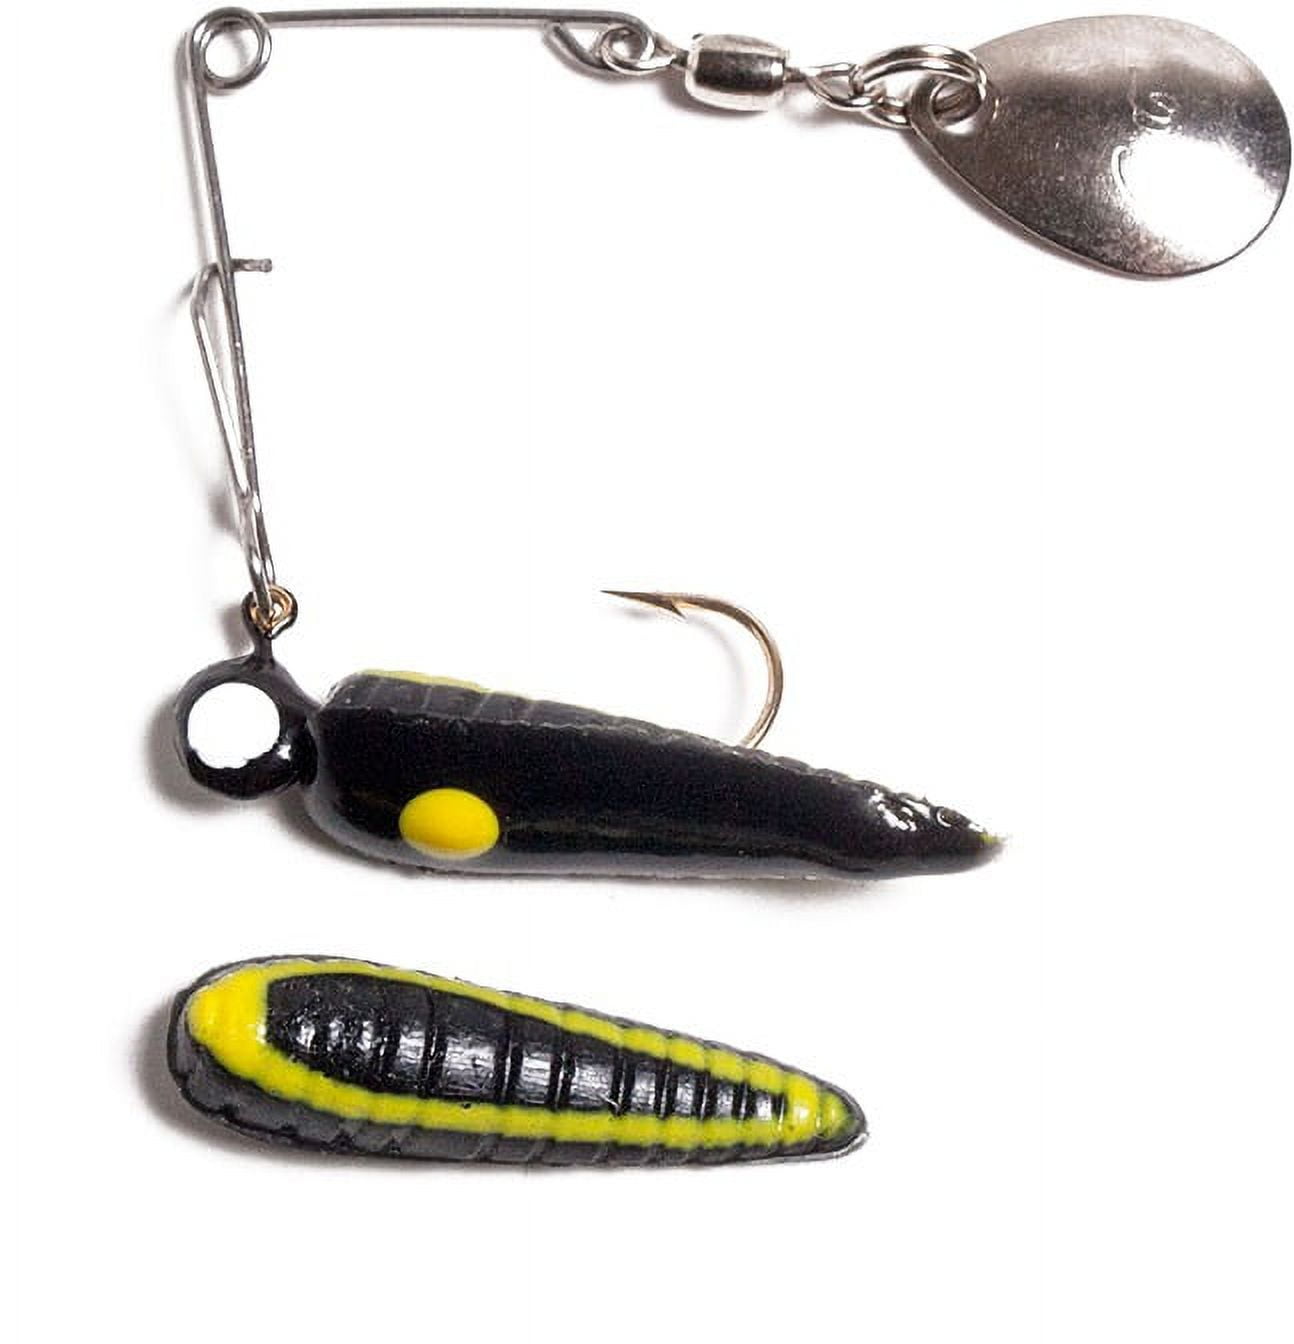 Betts Tackle Spin Grub 1/32oz. - Black/Yellow, Spinnerbaits 